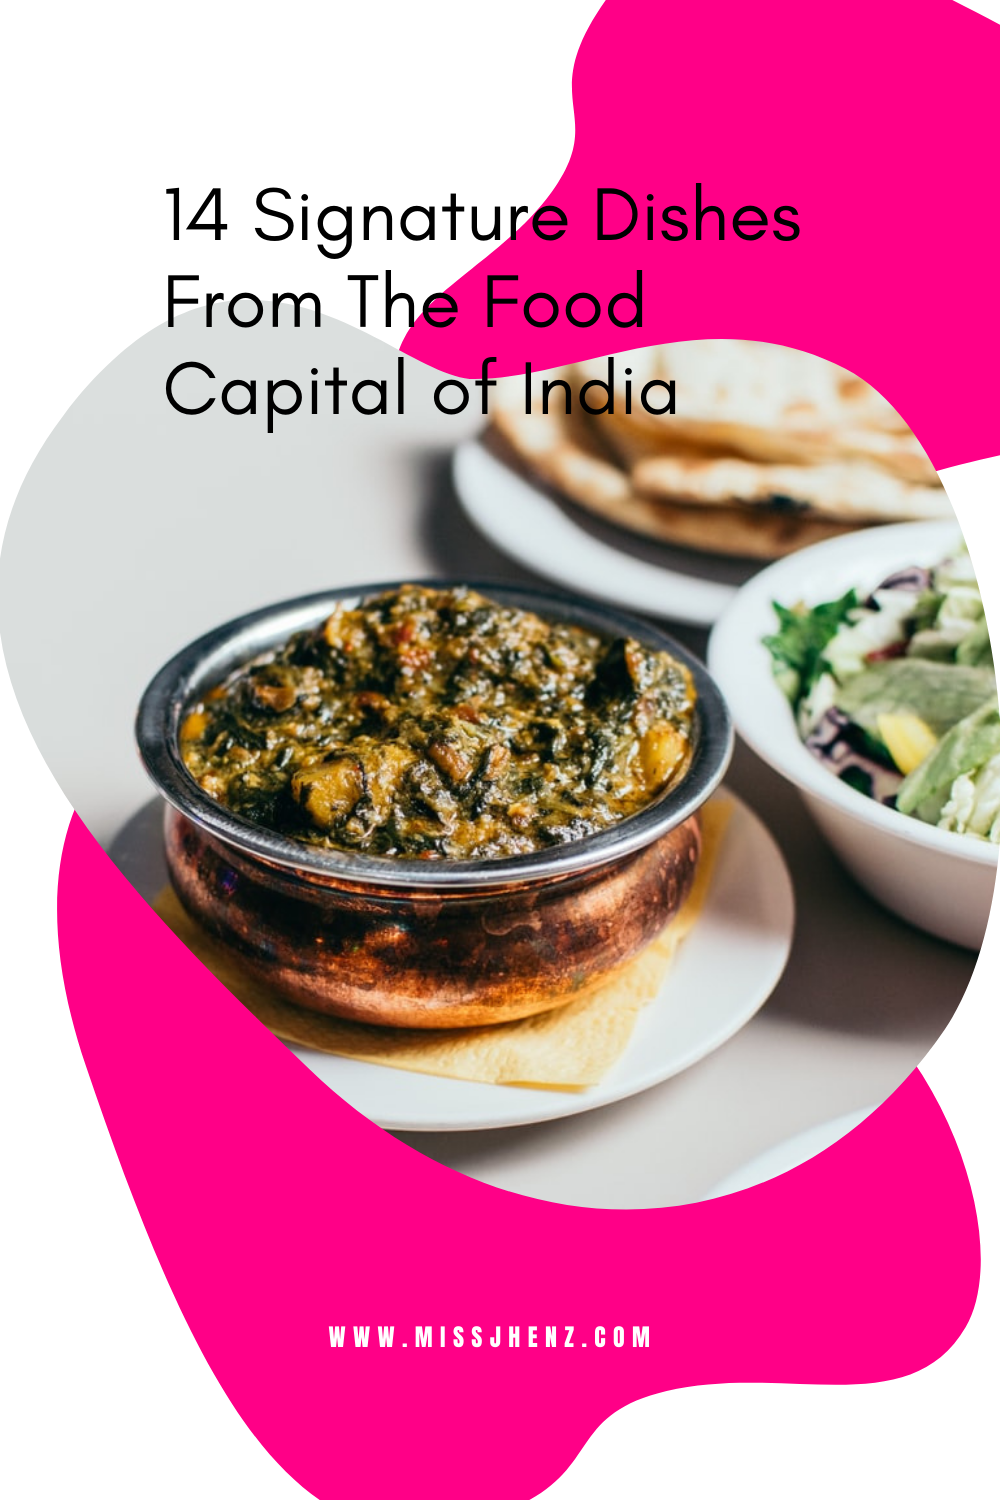 14 Signature Dishes From The Food Capital of India